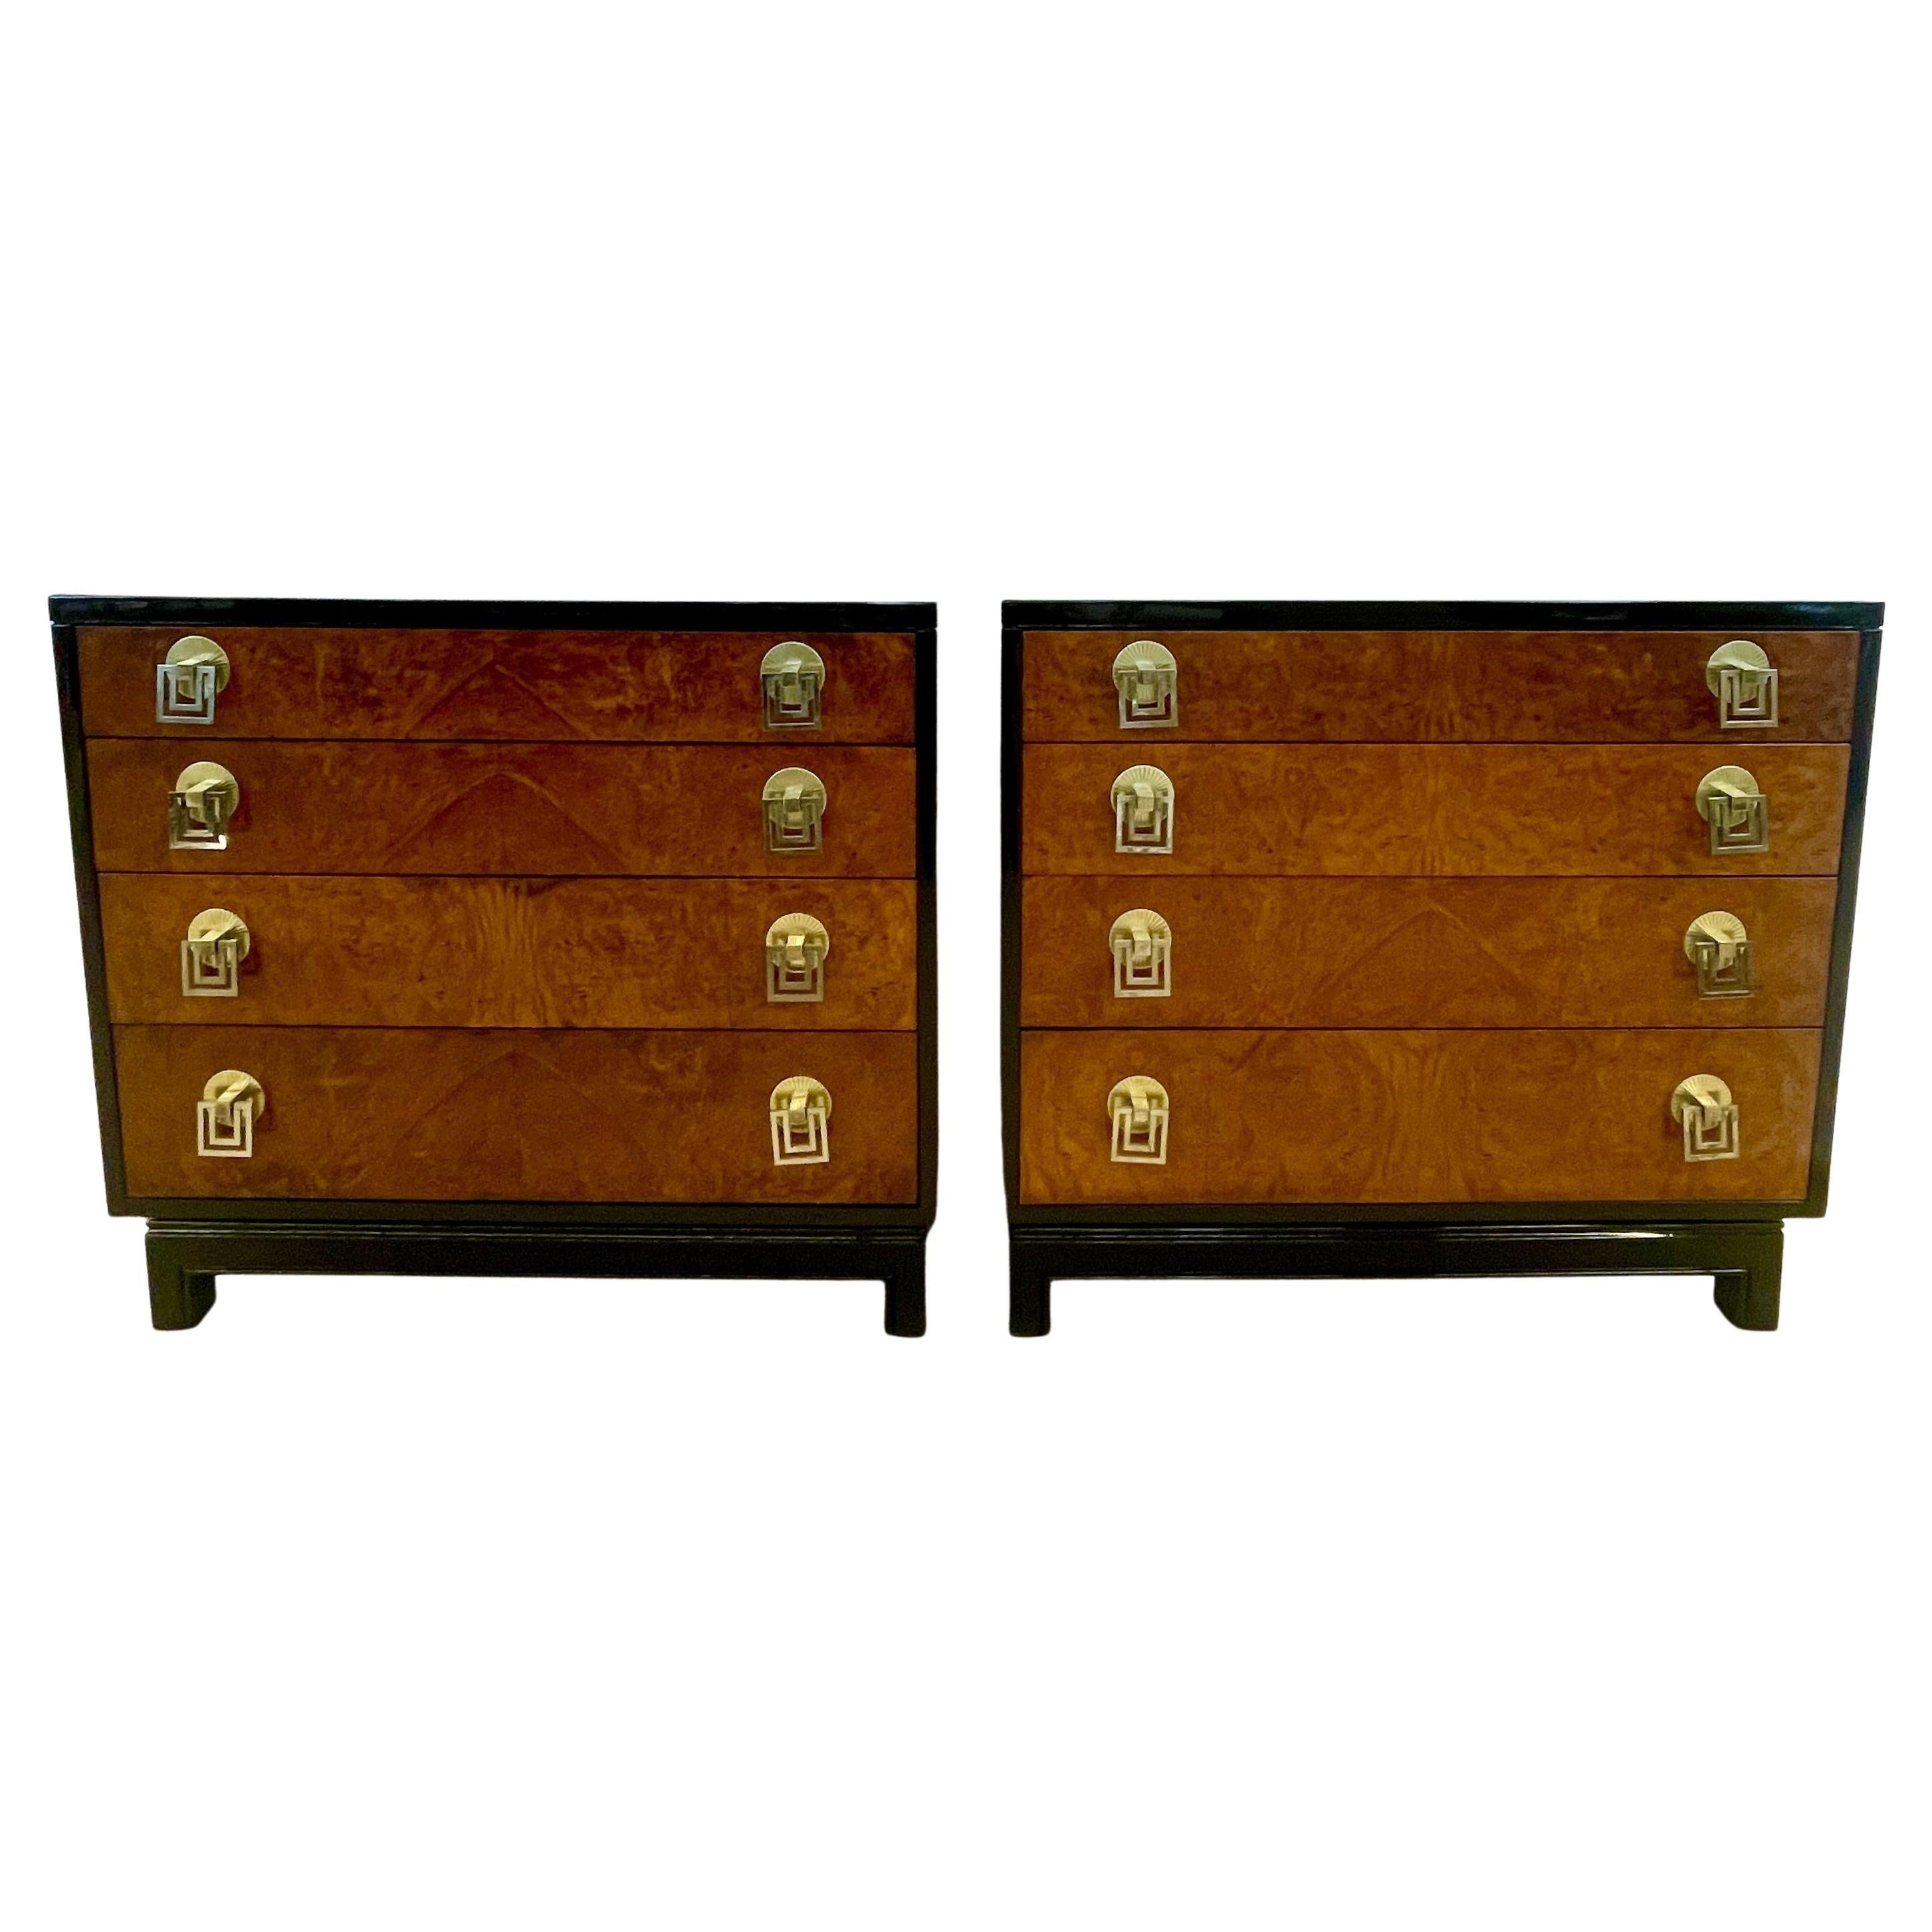 Pair of Mid-Century Modern Commodes, Chests by Renzo Rutili for John Stuart